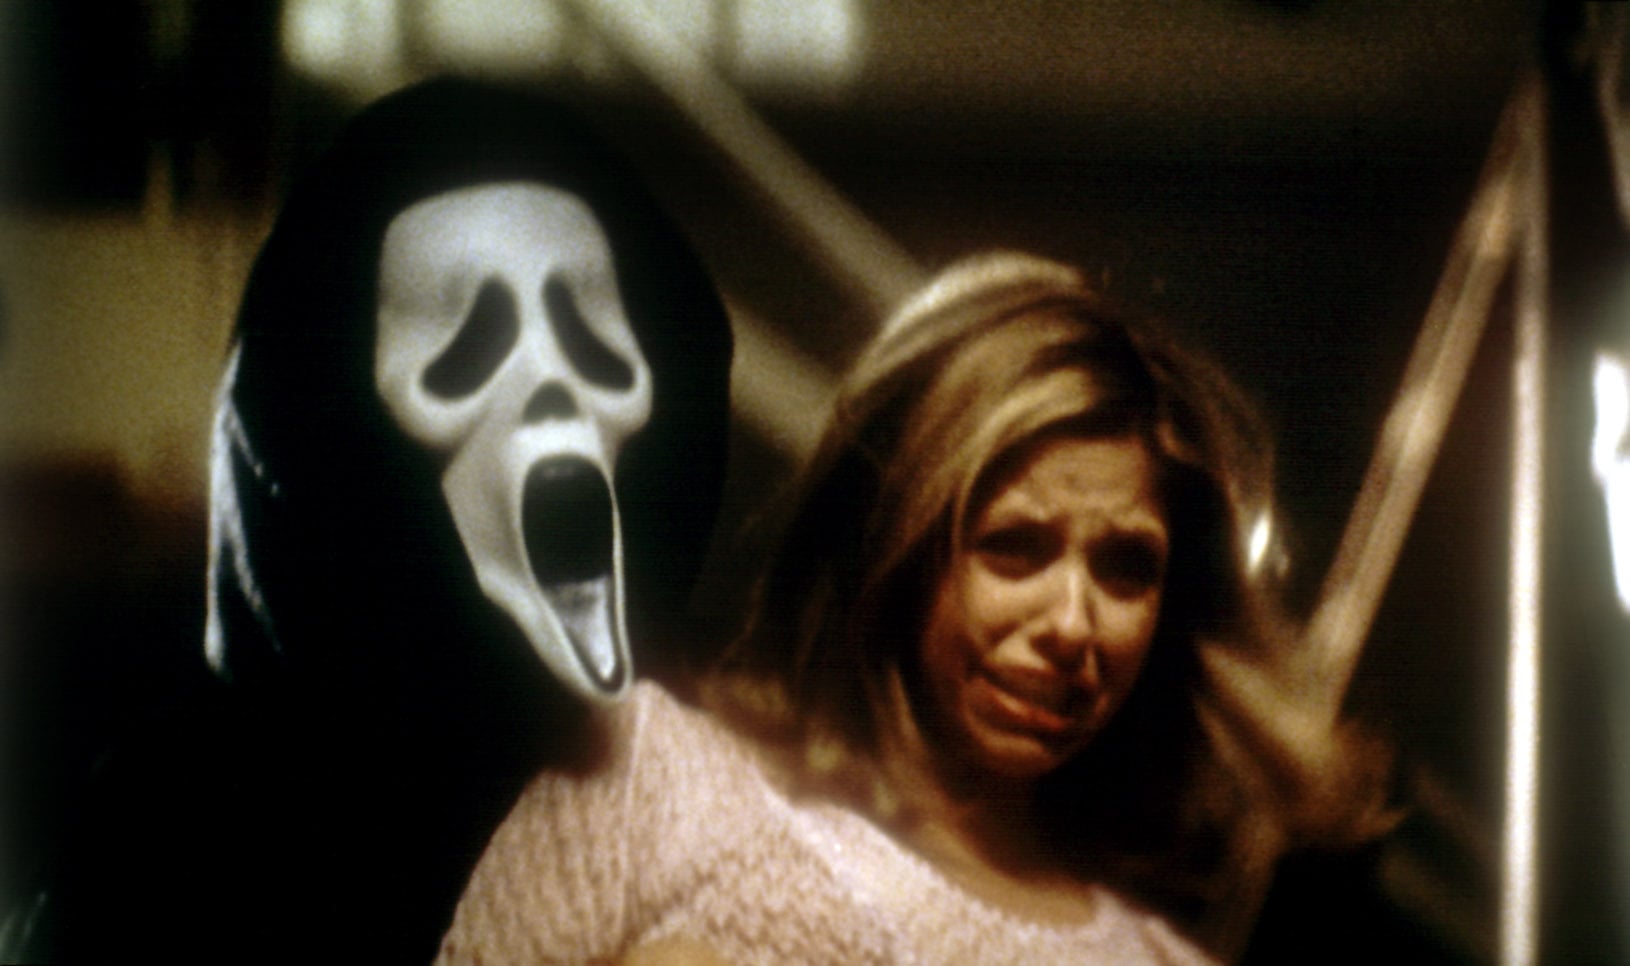 What Makes Scream's Ghostface Such a Scary Horror Icon?